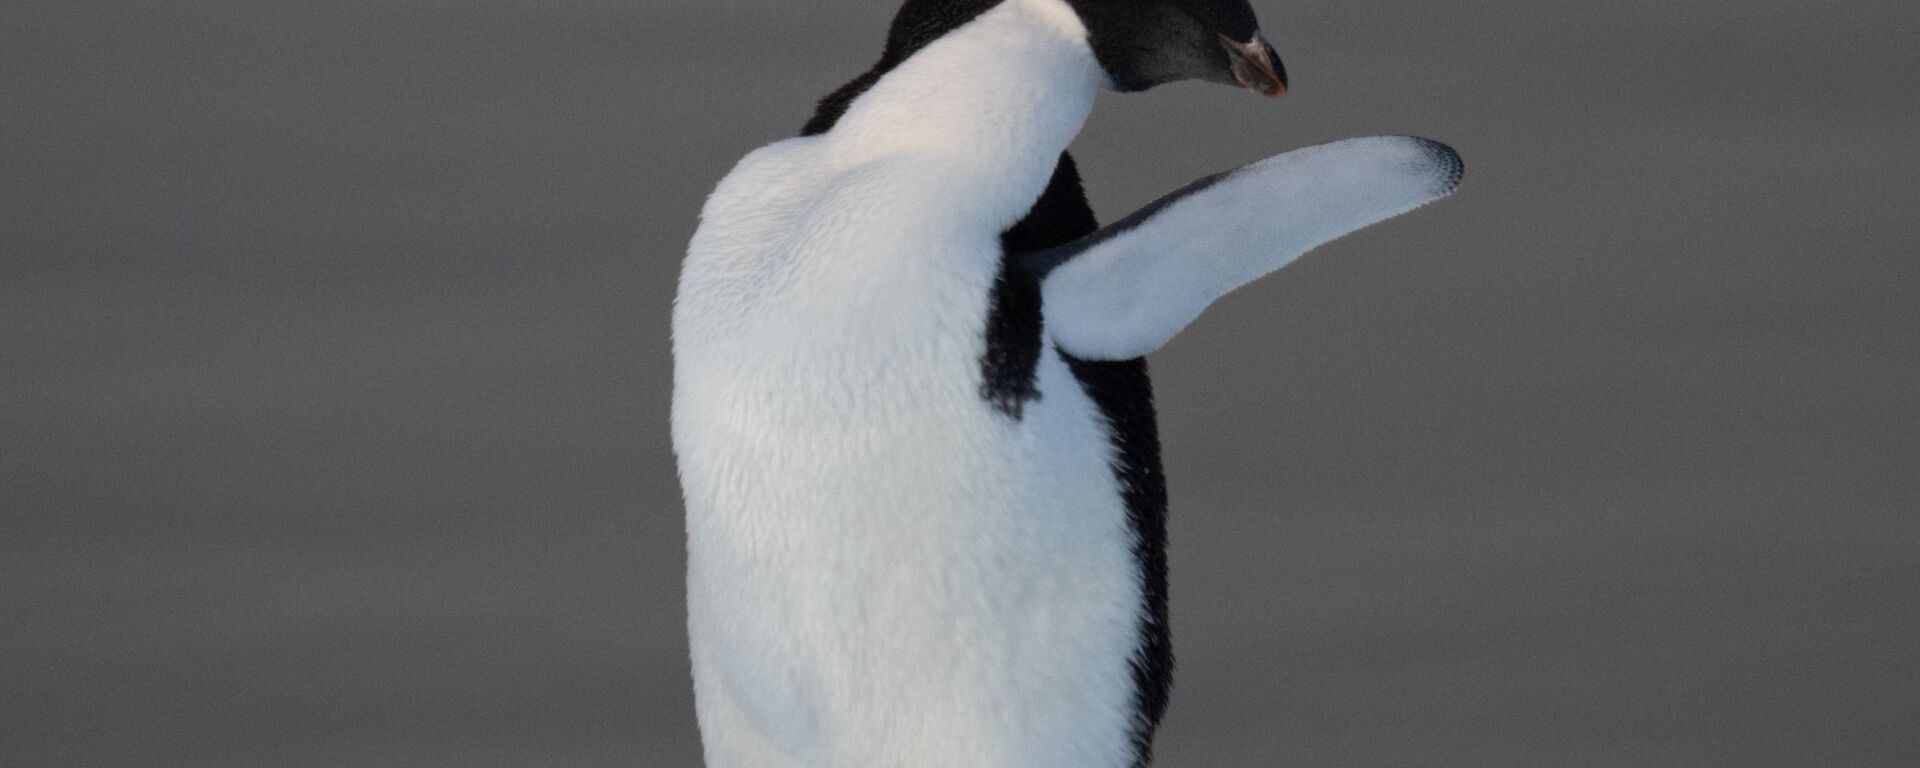 A penguin raises its wing to wave